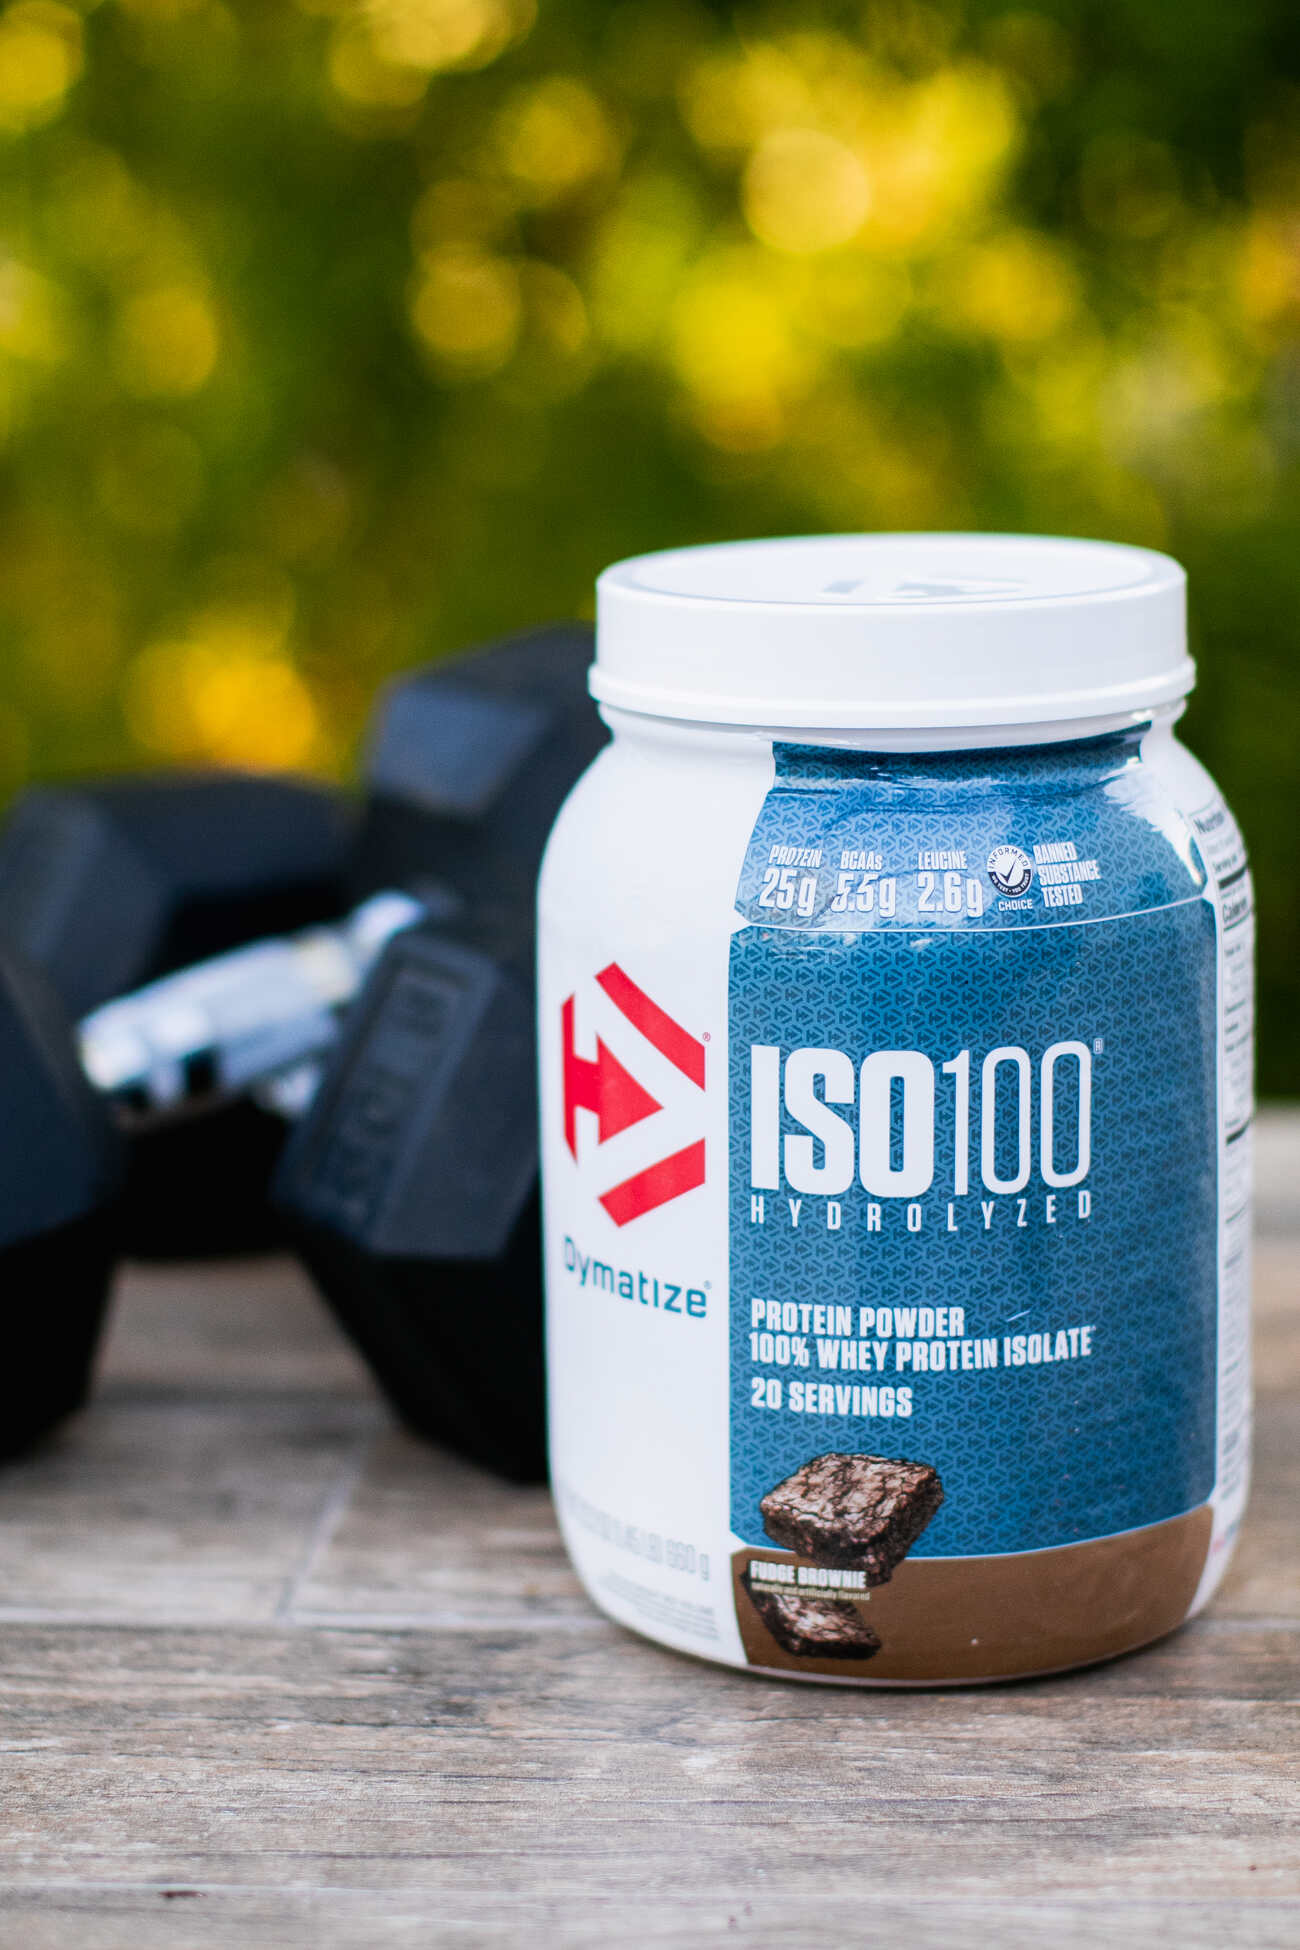 A white and blue container of Dymatize ISO100 Hydrolyzed protein powder, placed on an outdoor surface with a pair of black dumbbells to the side and green foliage in the background